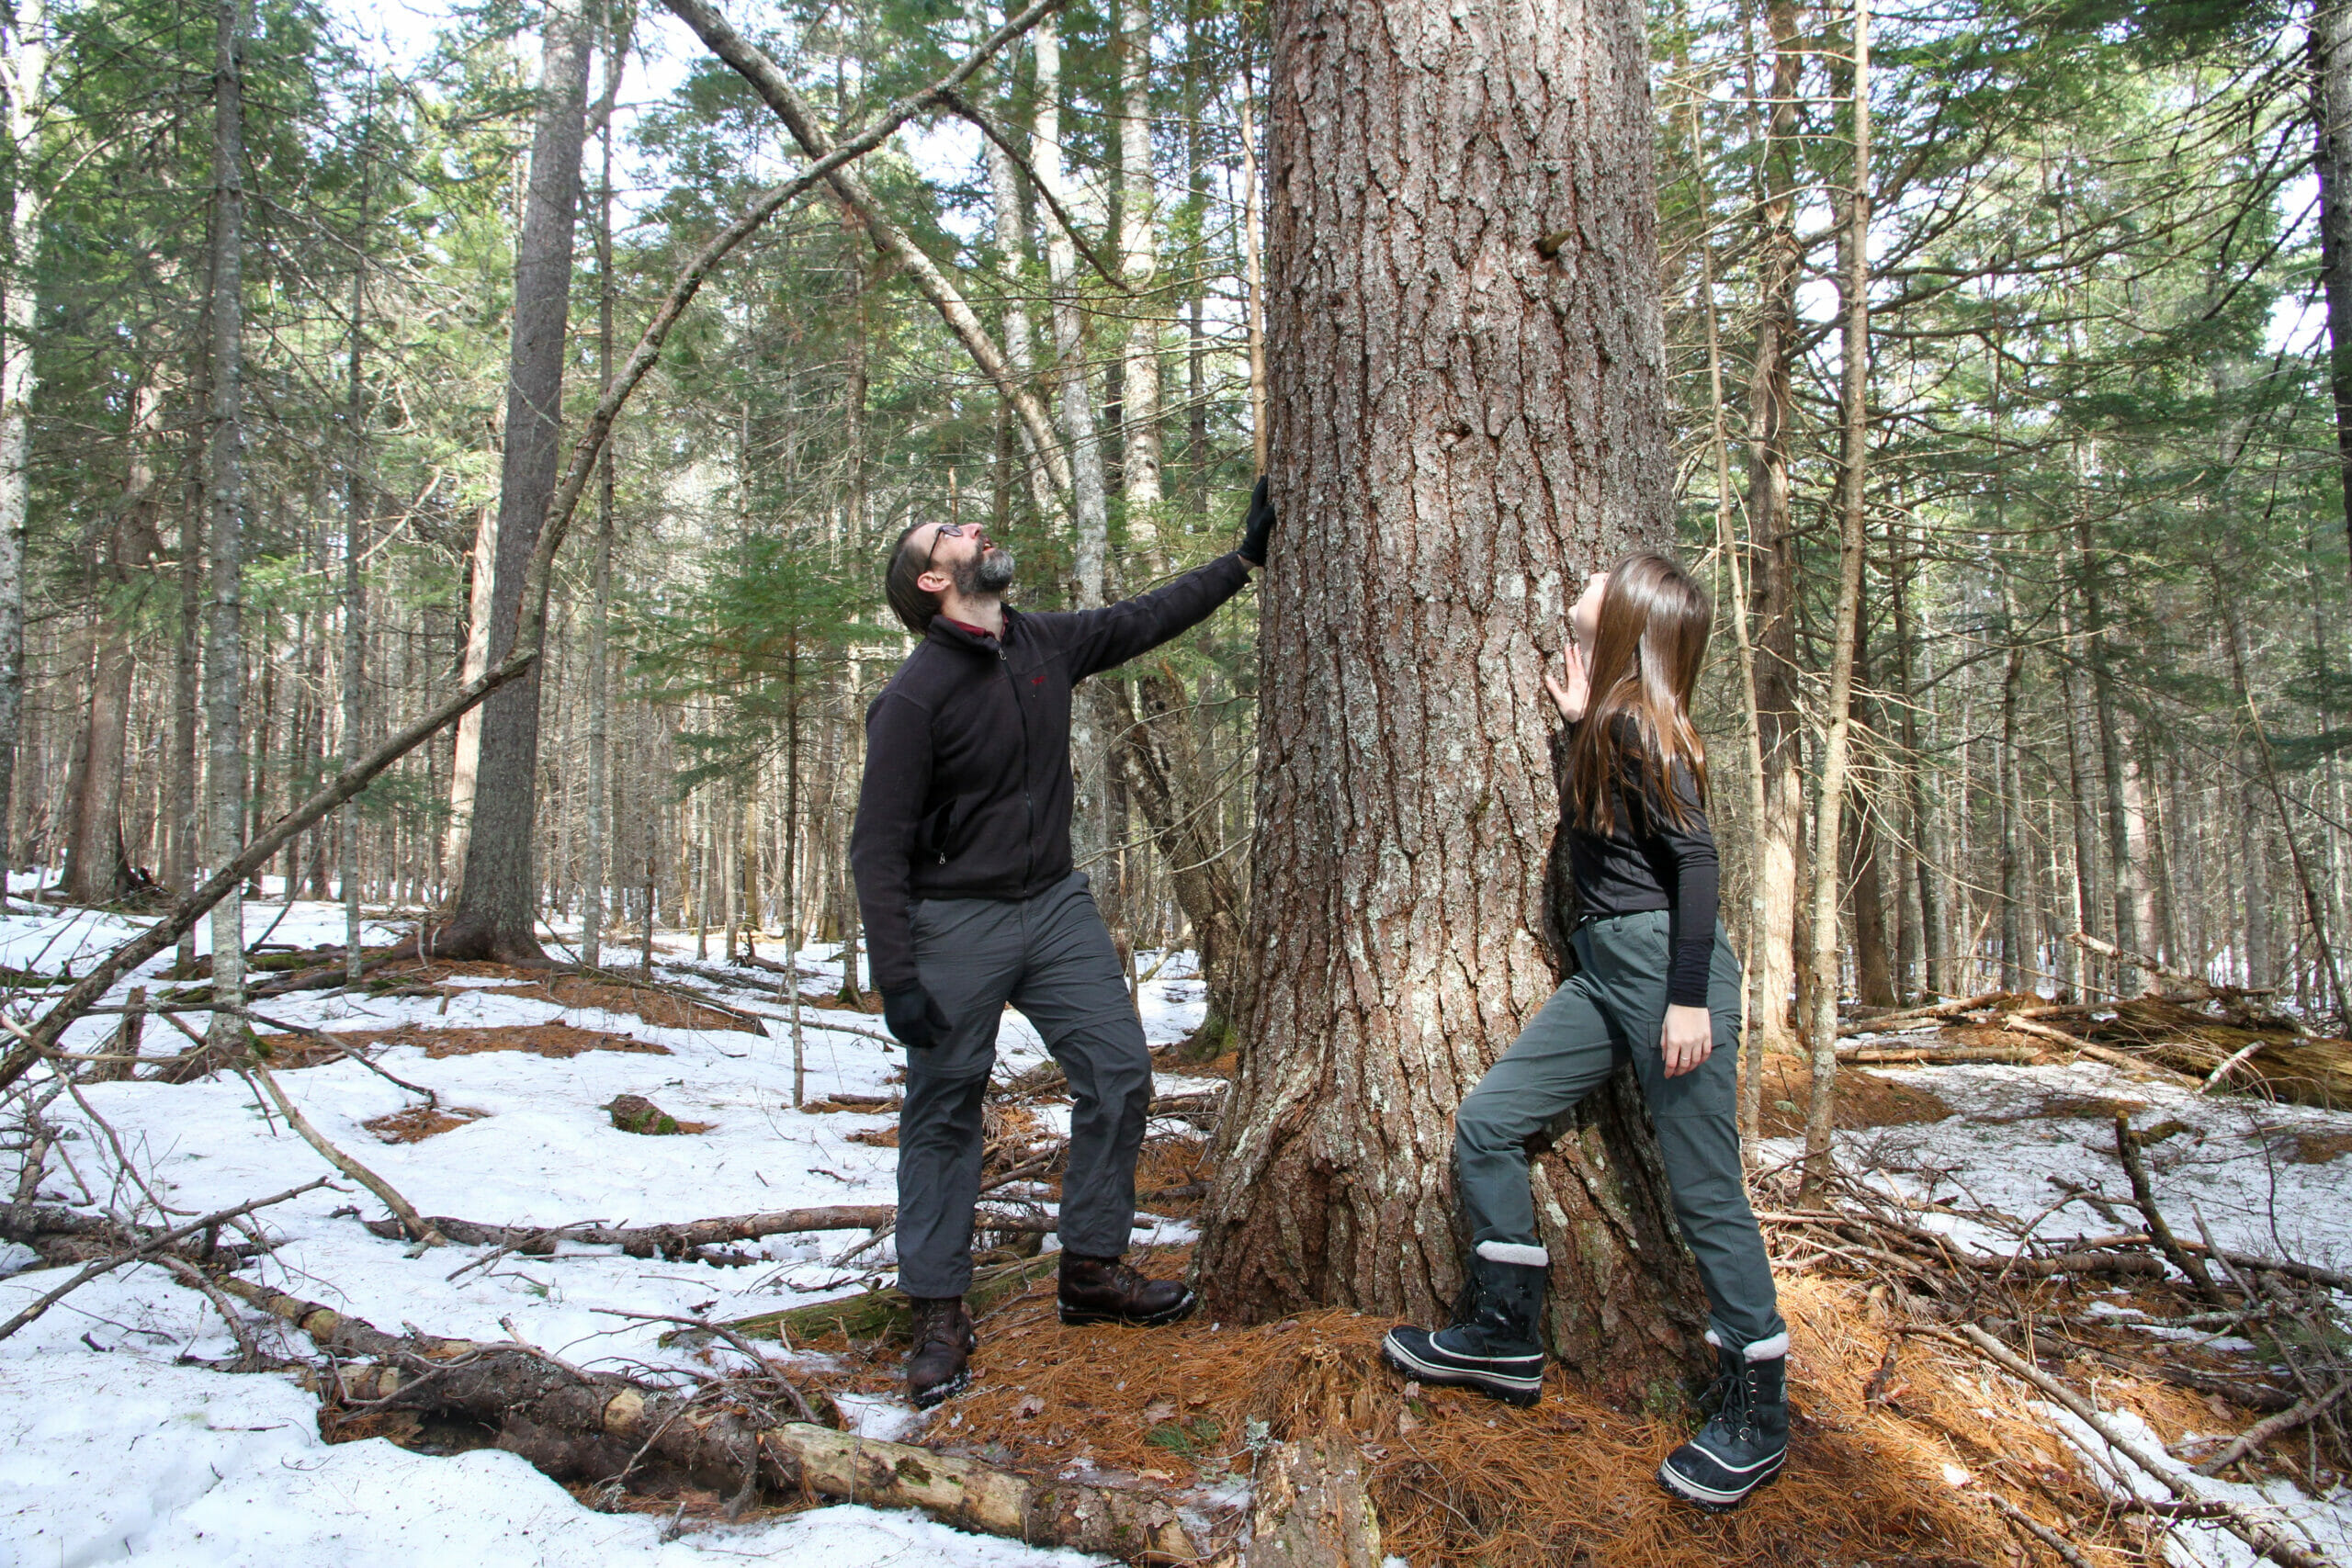 Two people, one man and a young woman, stand in a snow covered forest landscape. Both are leaning their hands against a large tree, looking up at the sky or forest canopy.